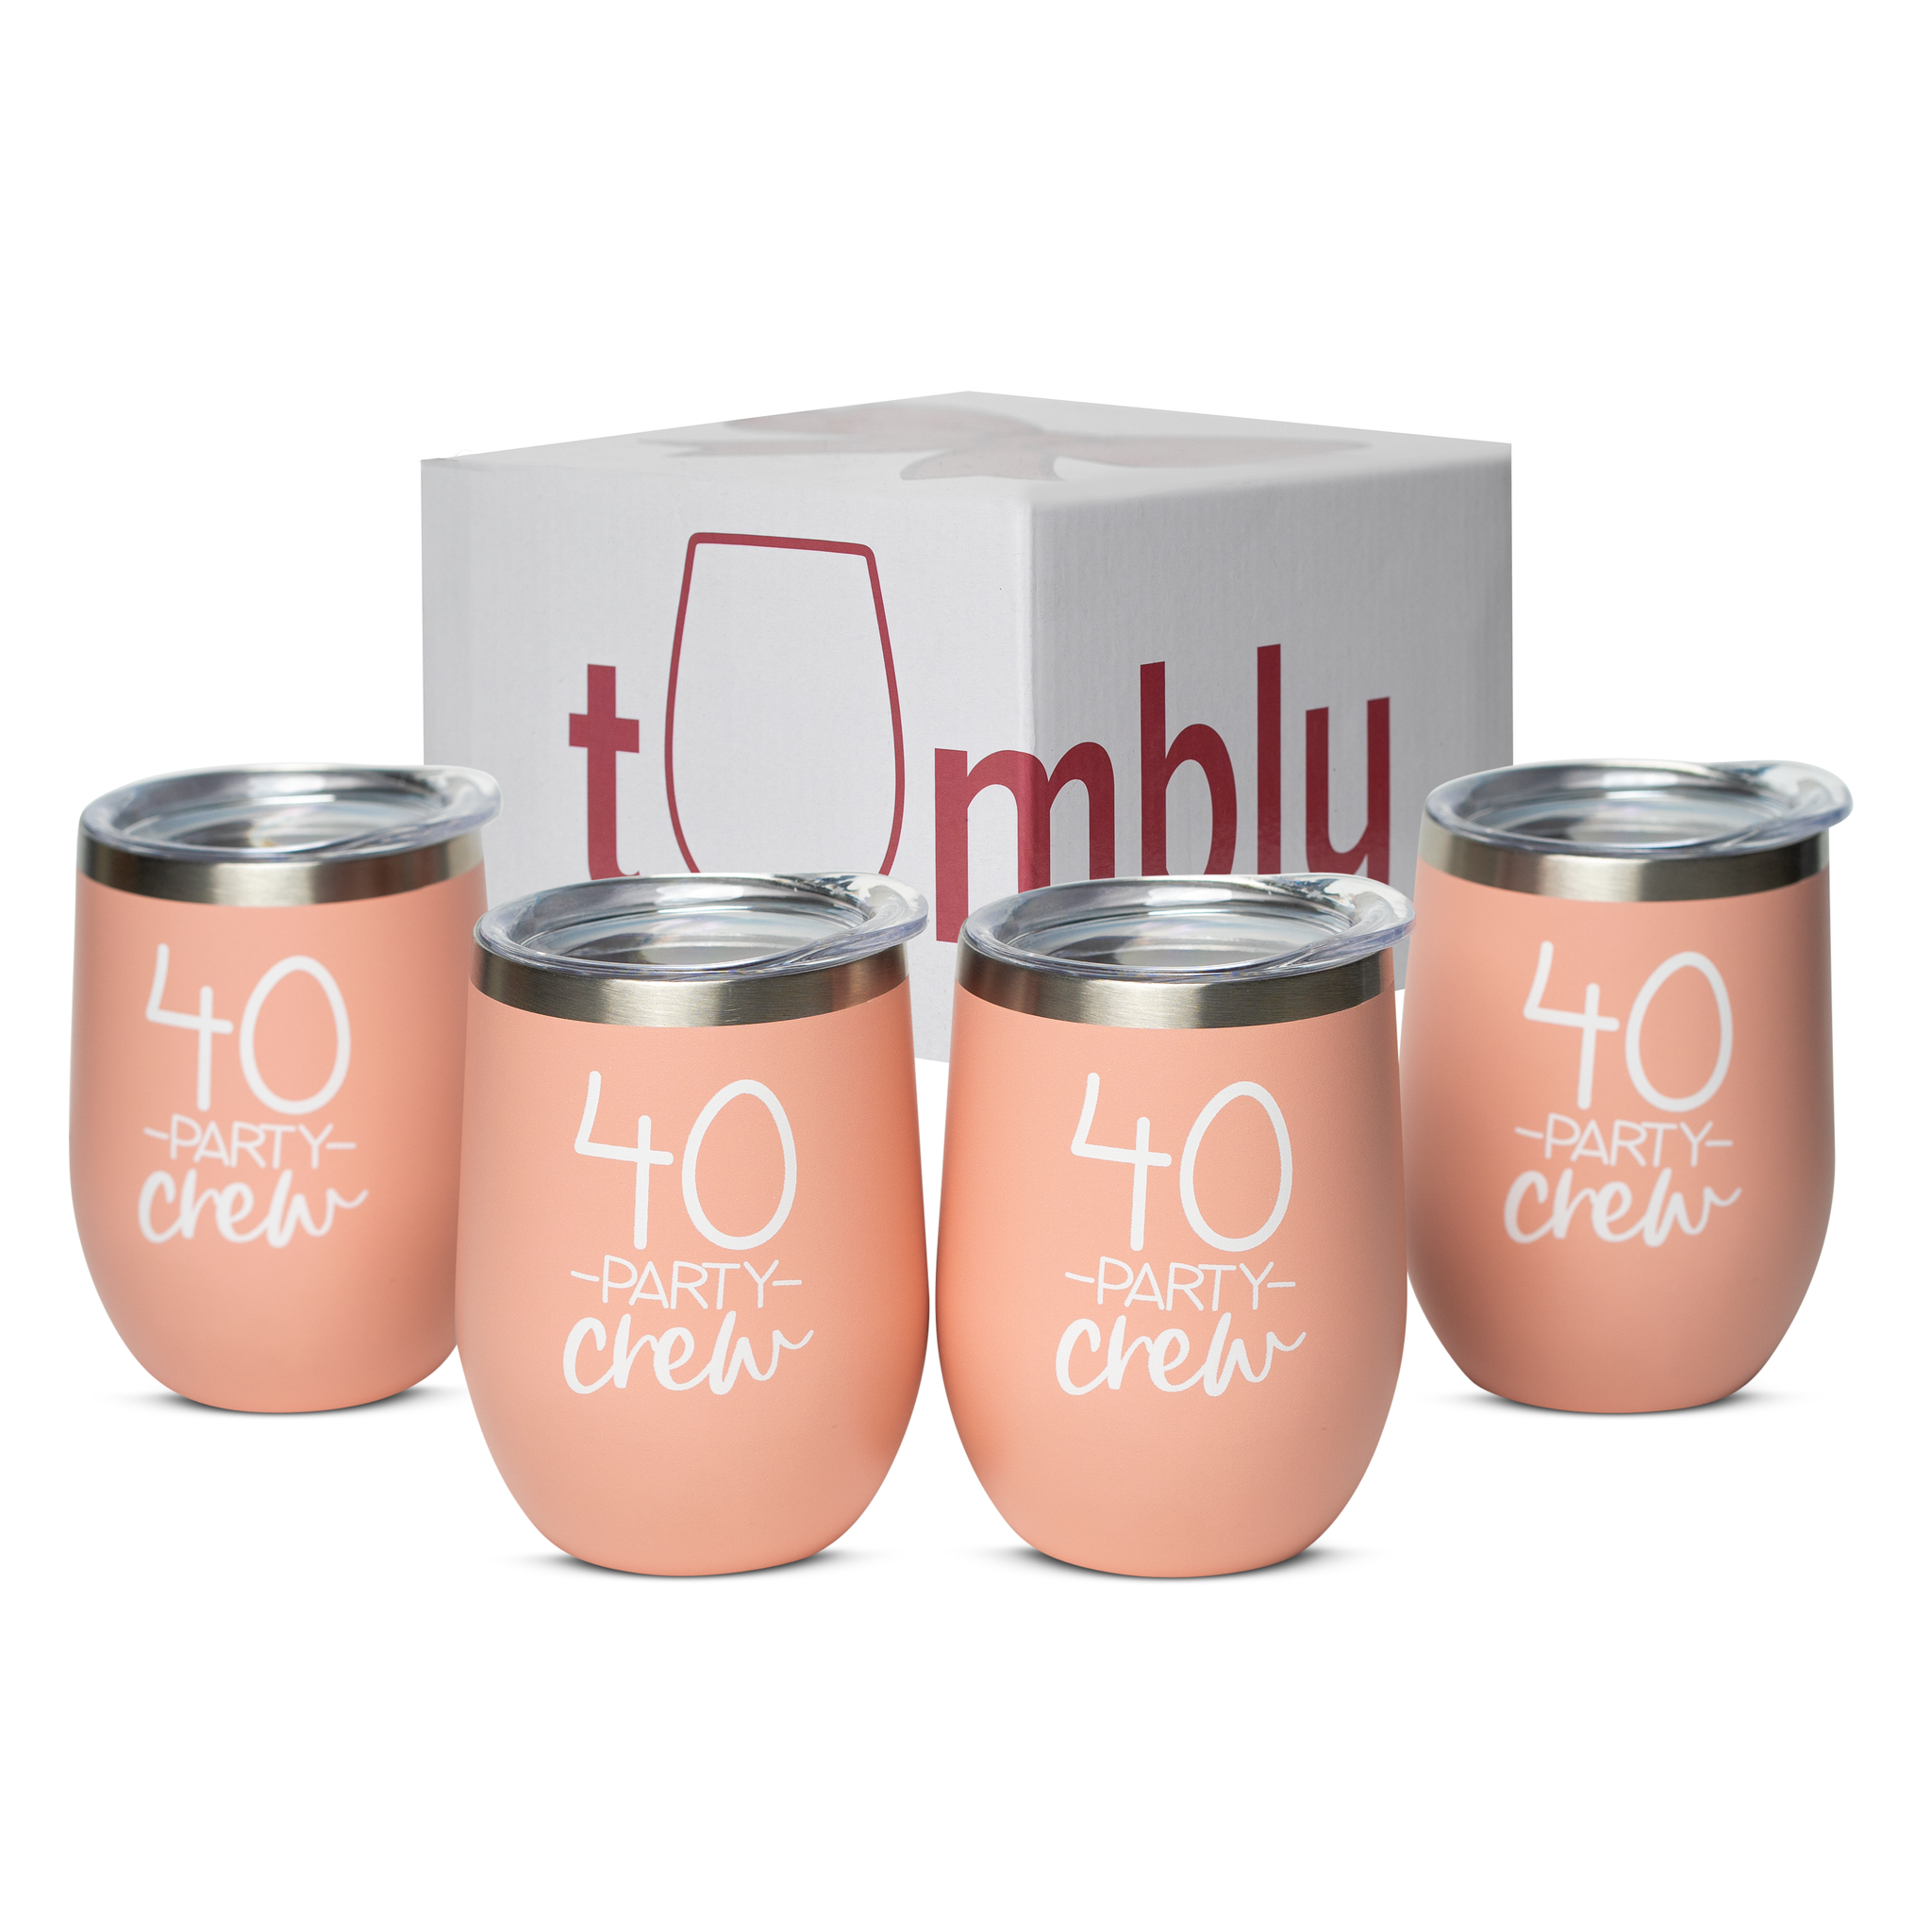 40 Party Crew Tumbler 4-Pack - 40th Birthday Gifts for Women - 40